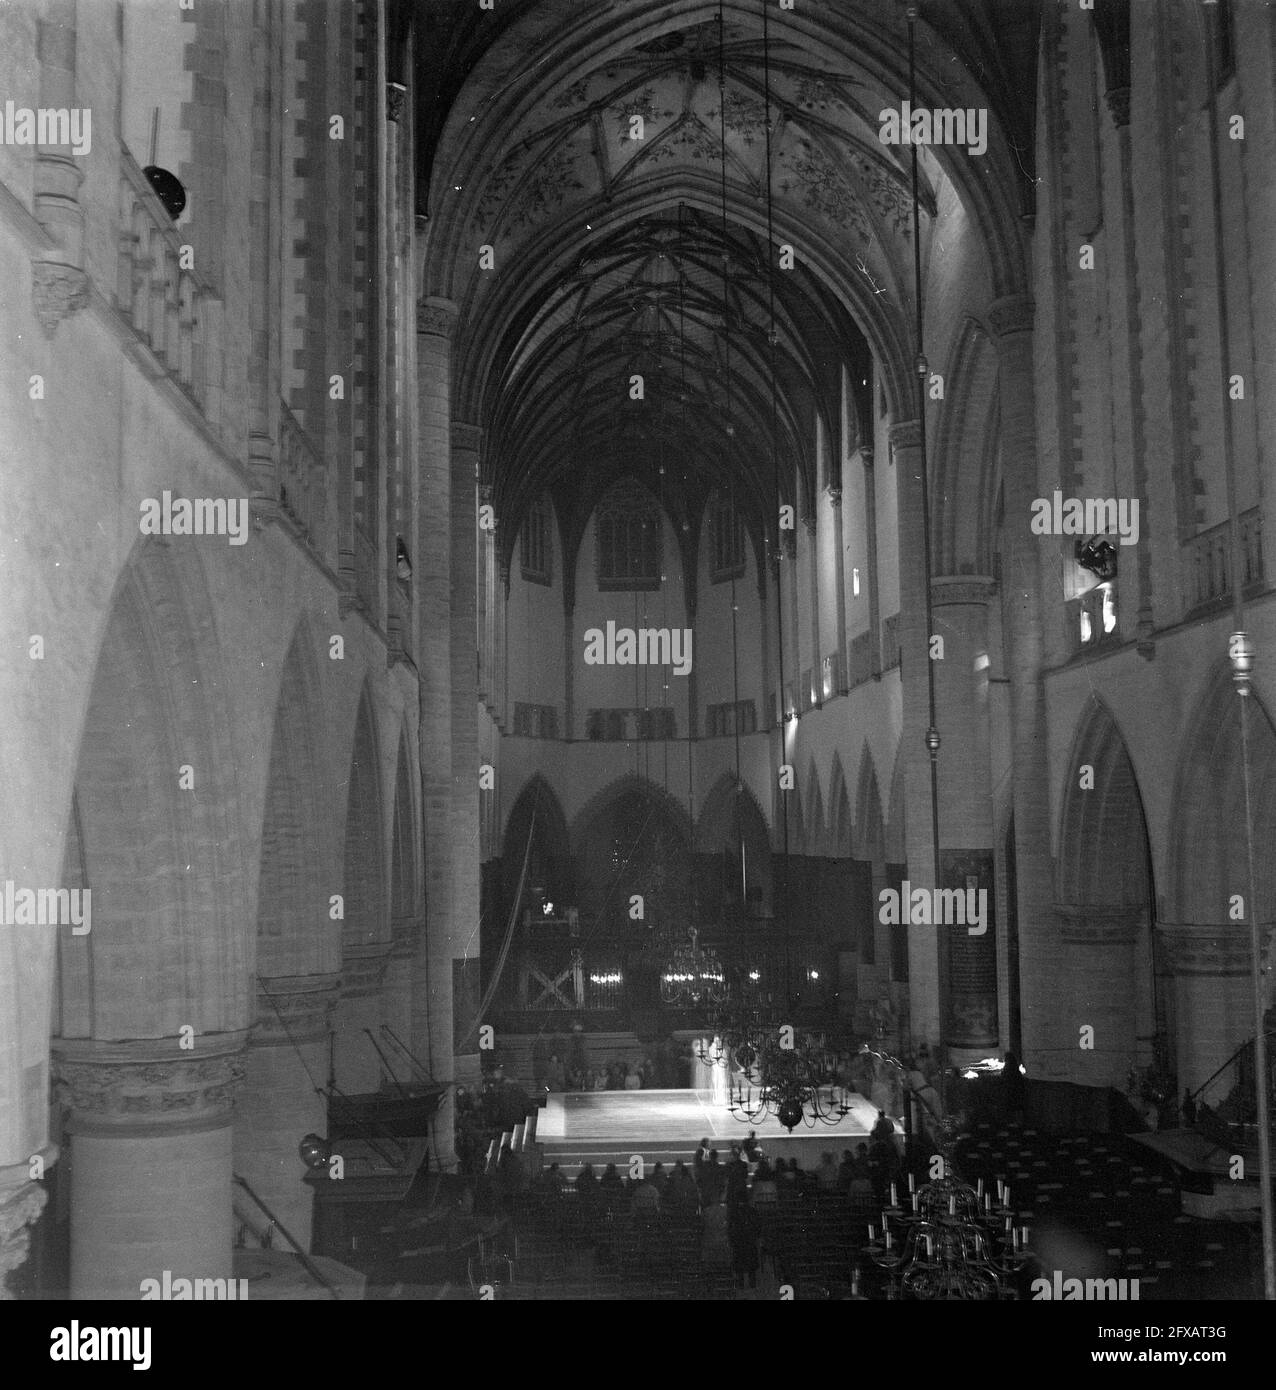 Christmas play in the Grote of St. Bavokerk in Haarlem, December 17, 1945, interiors, churches, The Netherlands, 20th century press agency photo, news to remember, documentary, historic photography 1945-1990, visual stories, human history of the Twentieth Century, capturing moments in time Stock Photo